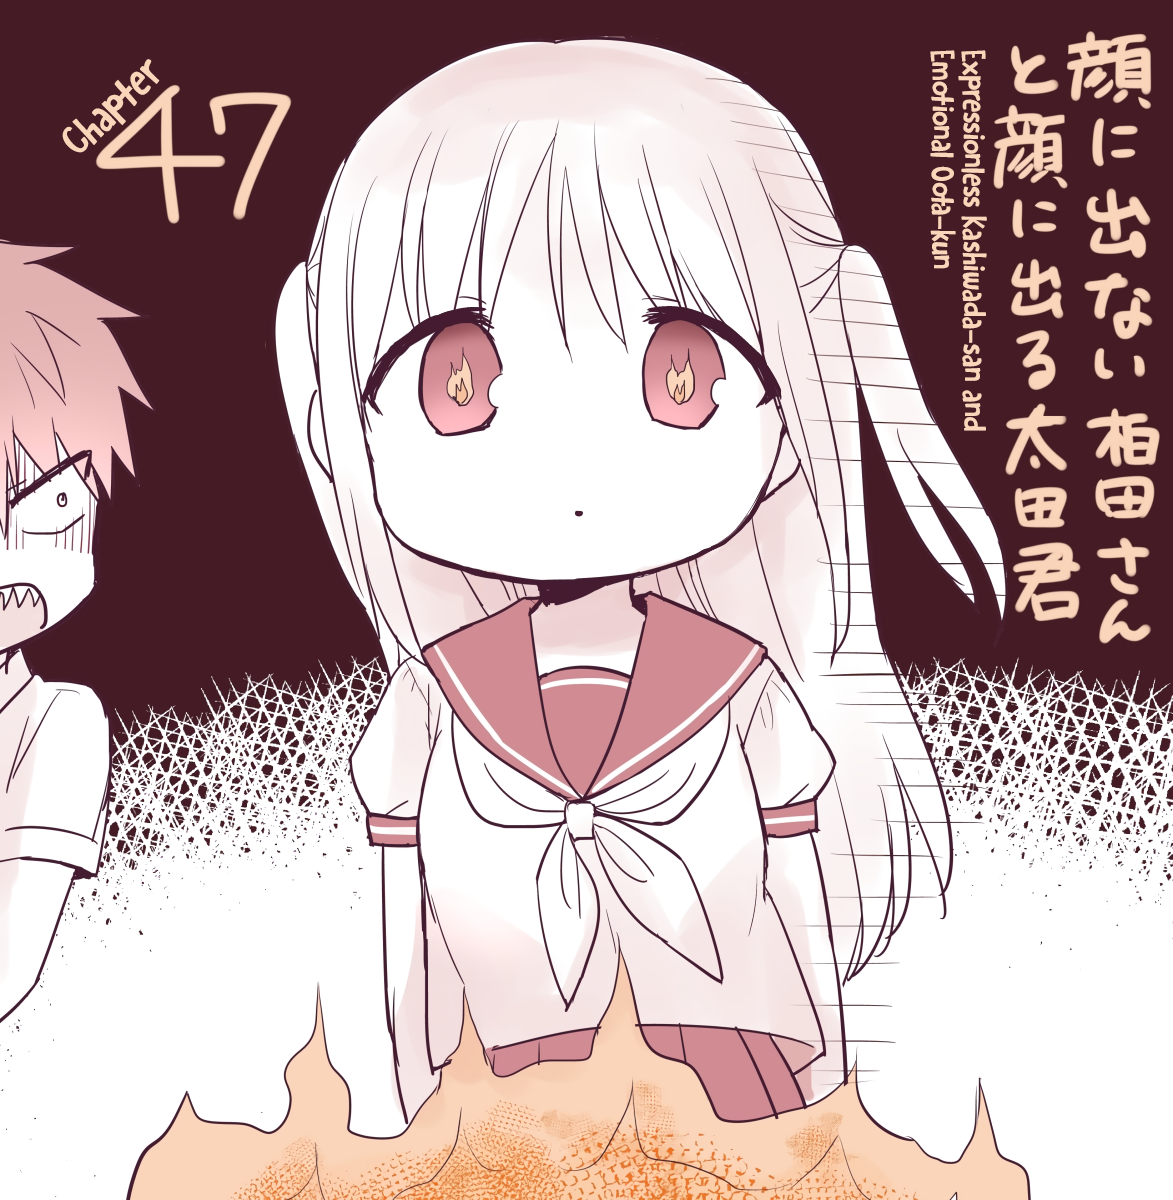 Expressionless Face Girl And Emotional Face Boy Vol.4 Chapter 47